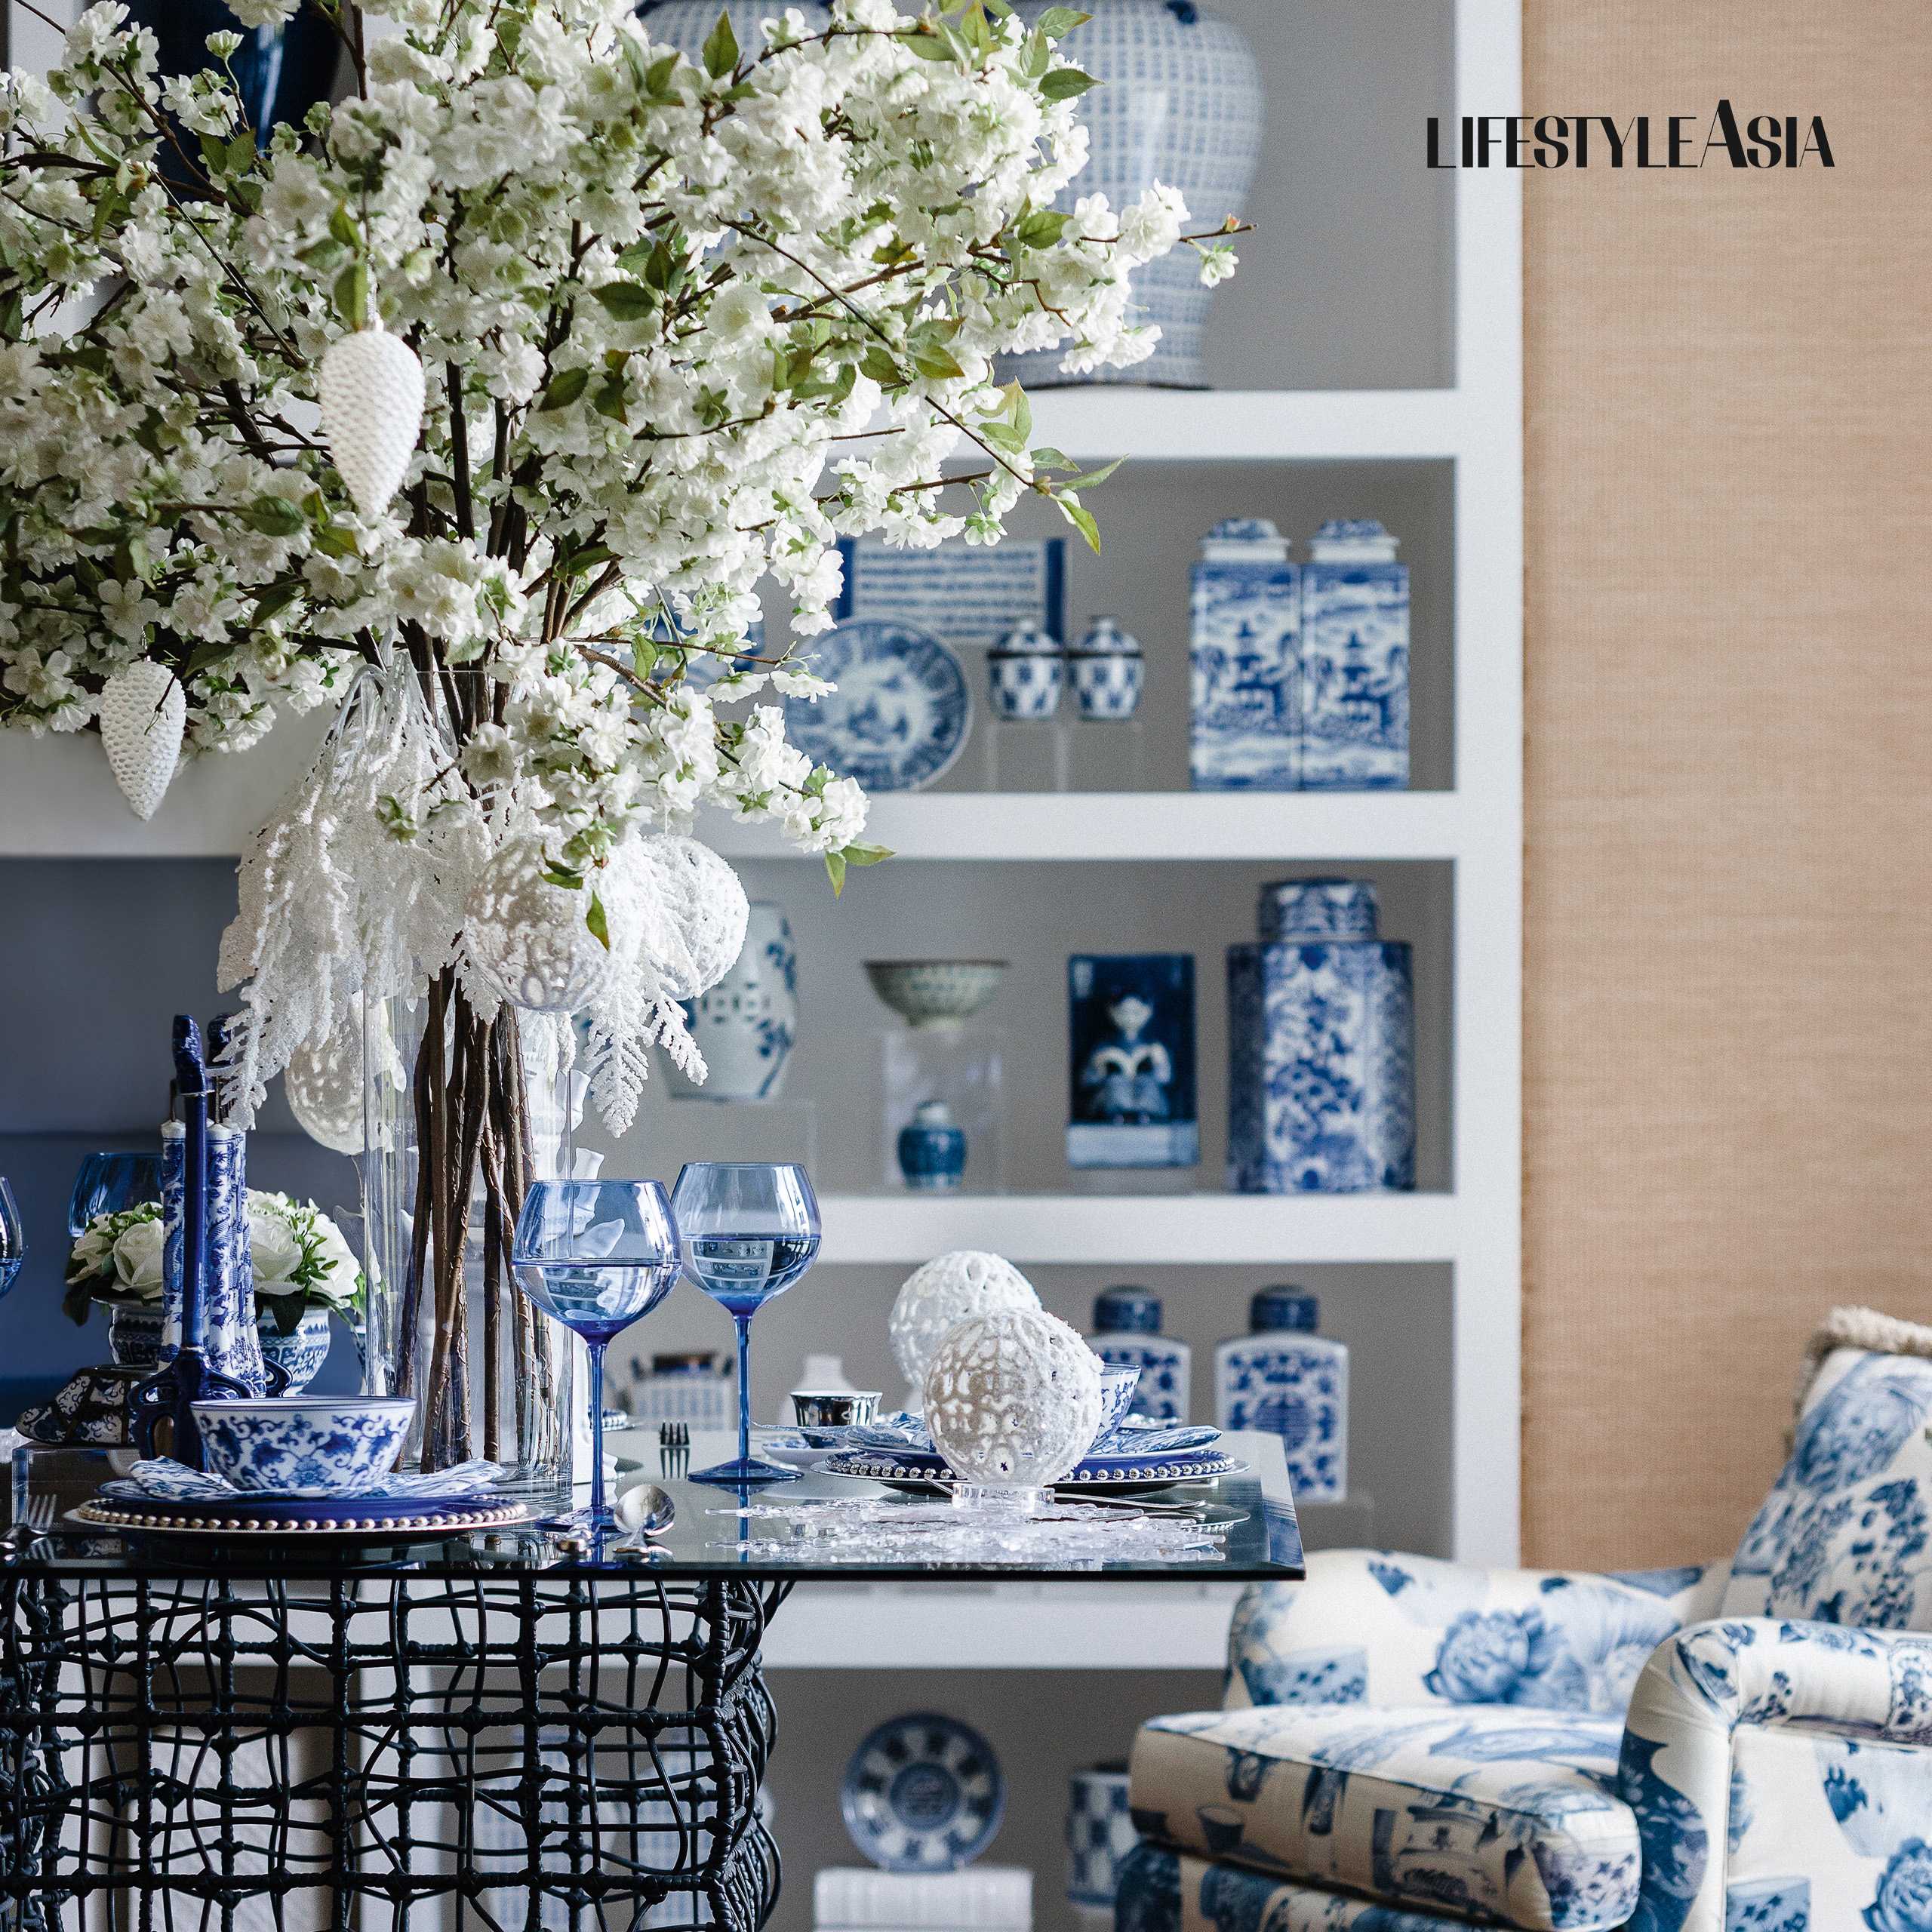 Cynthia’s collections are displayed in open shelves as reminders of her travels. “I don’t think I will ever stop collecting blue and white accessories. For as long as I see a very interesting piece that is unique and beautiful, I will keep on adding to my collection.”